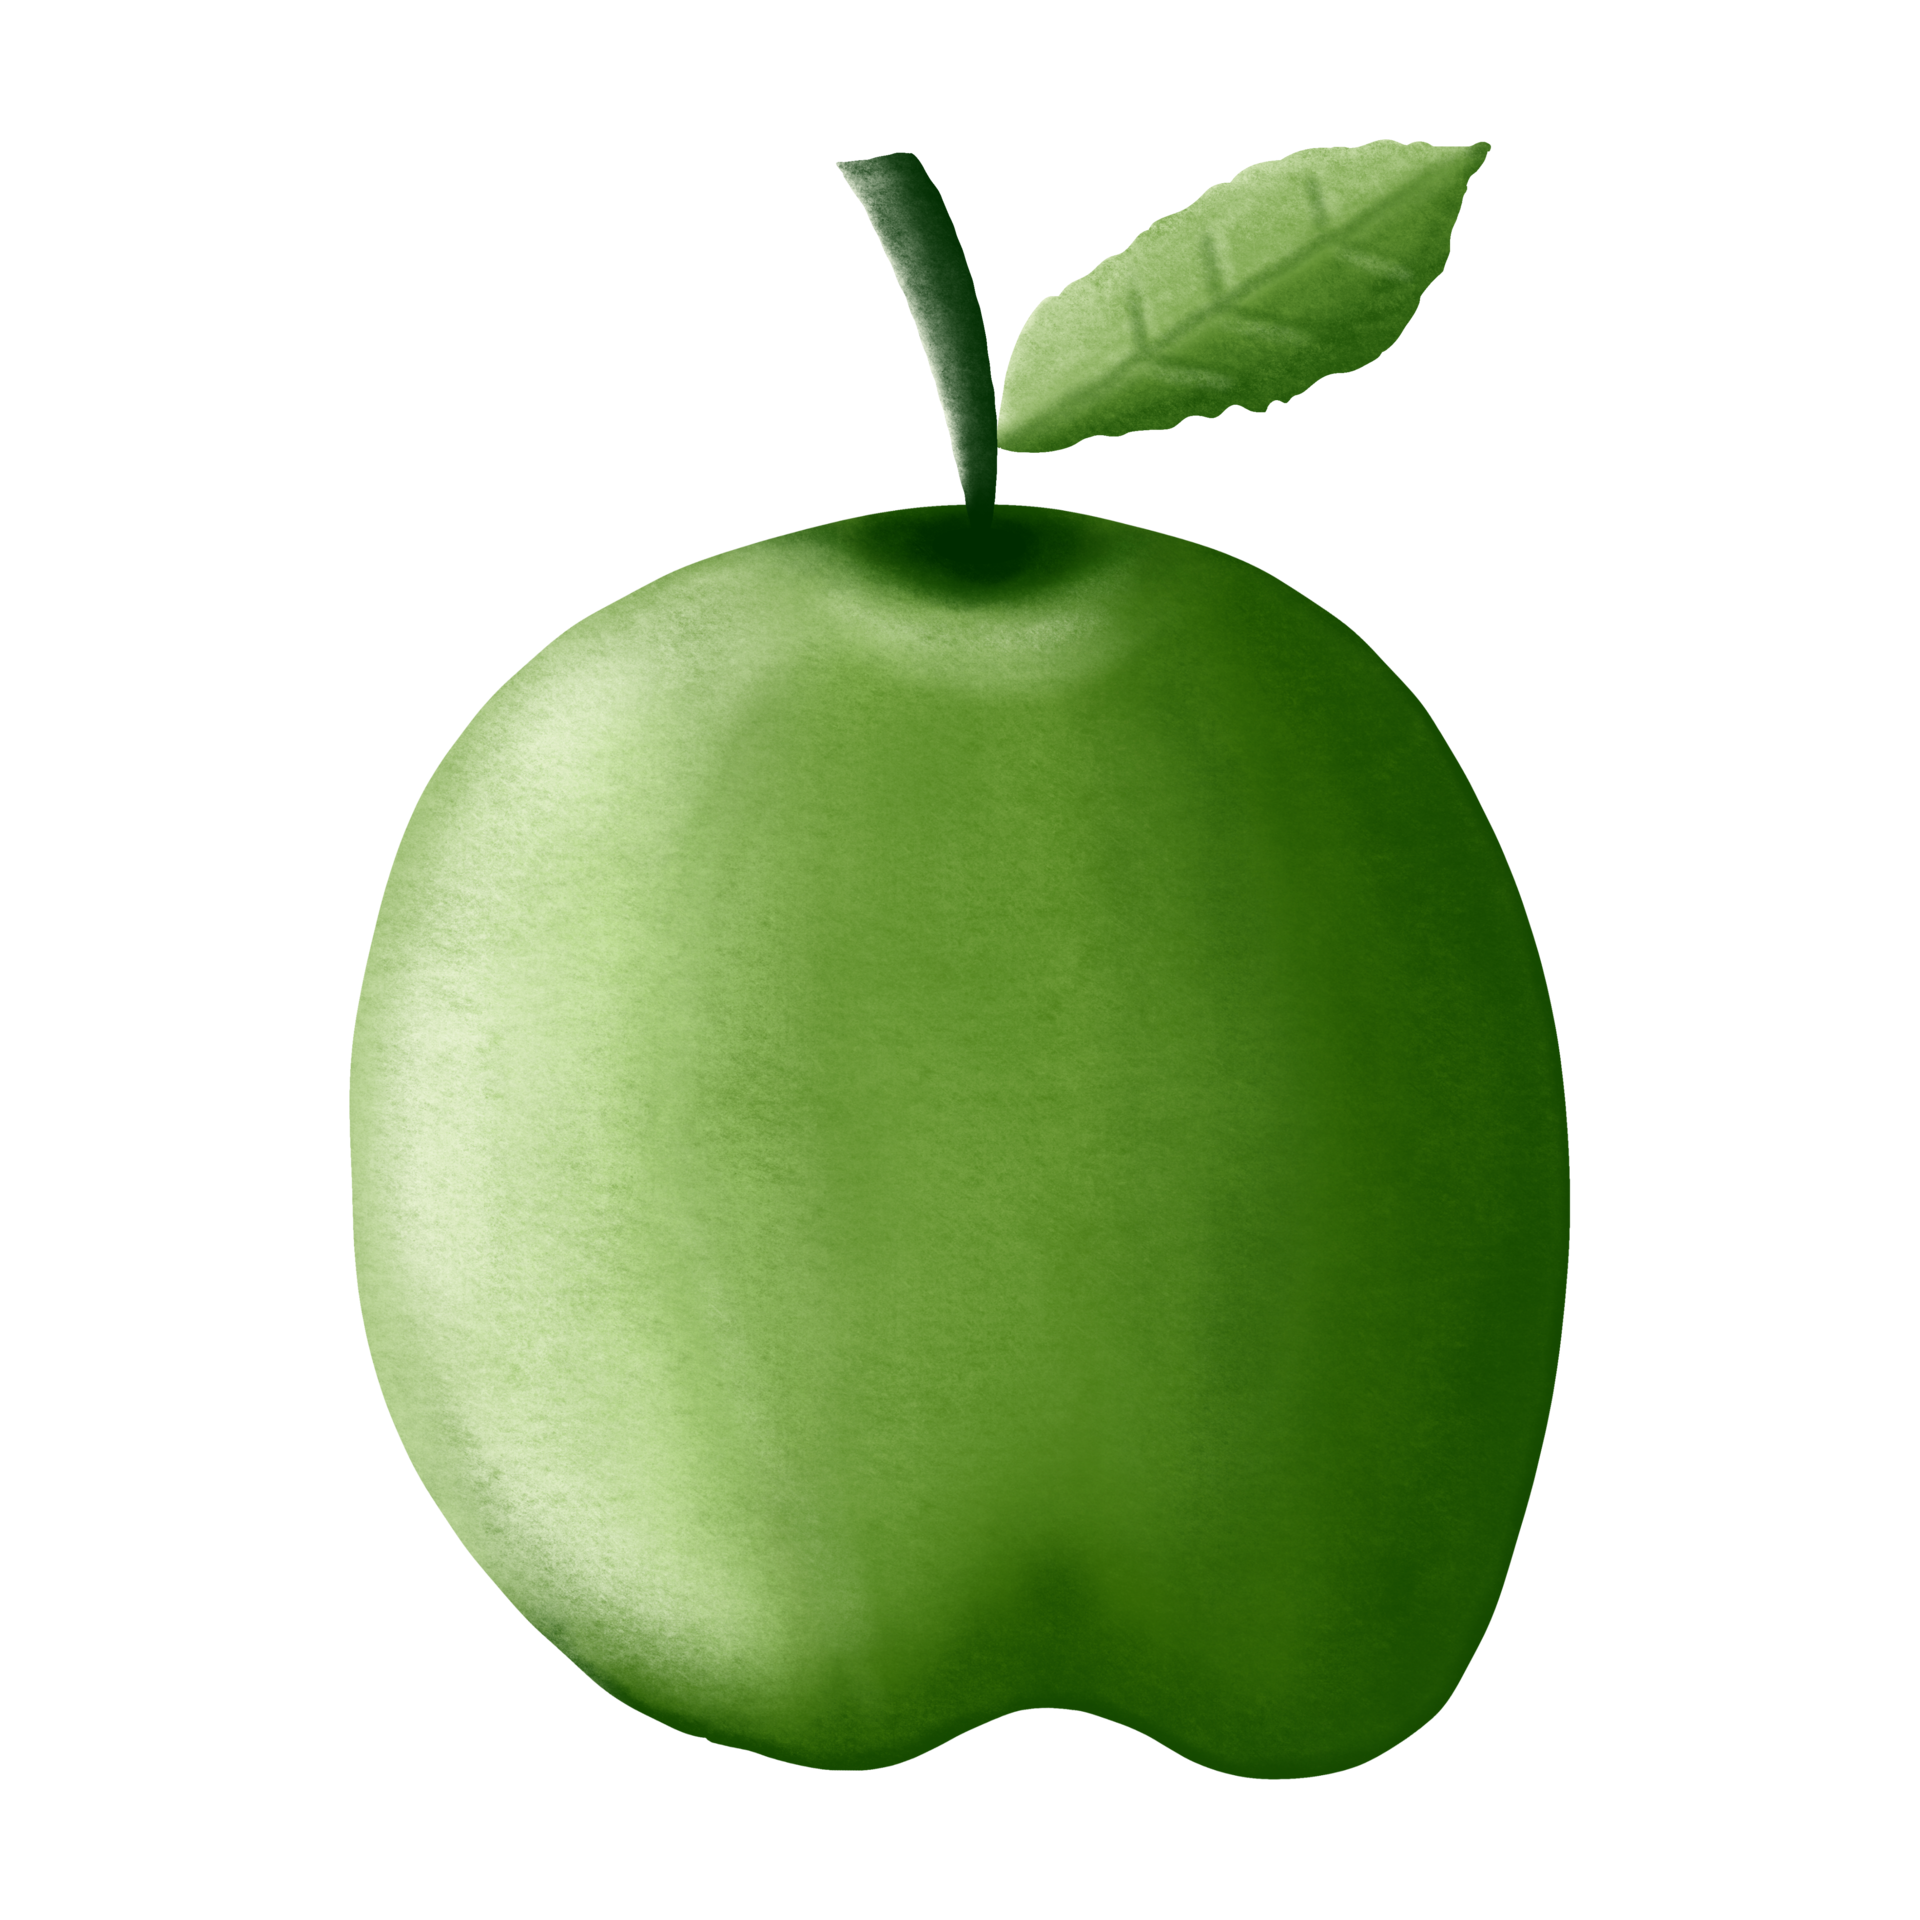 Green apple Illustrations and Clipart. 54,189 Green apple royalty free  illustrations, and drawings available to search from thousands of stock  vector EPS clip art graphic designers.